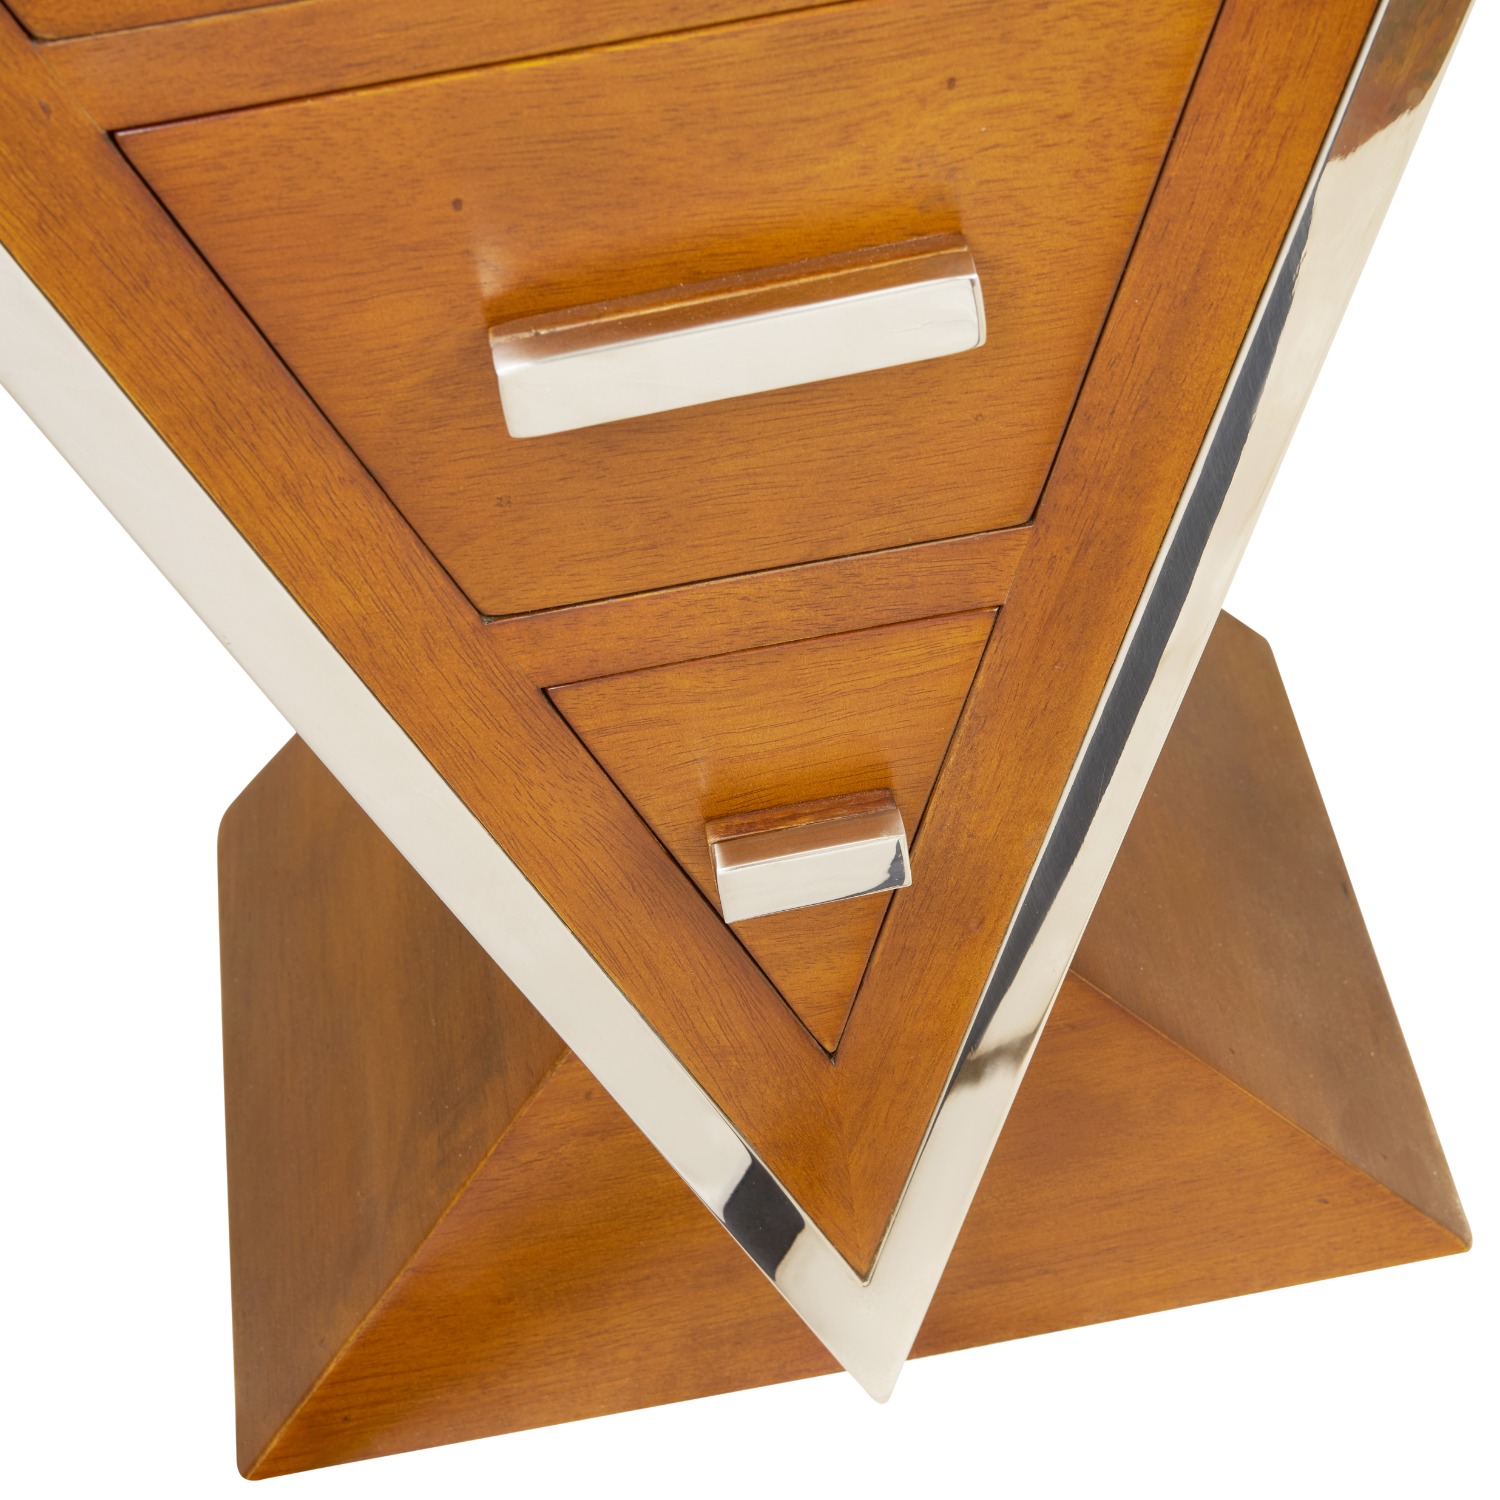 DELTA SMALL CHEST OF DRAWERS